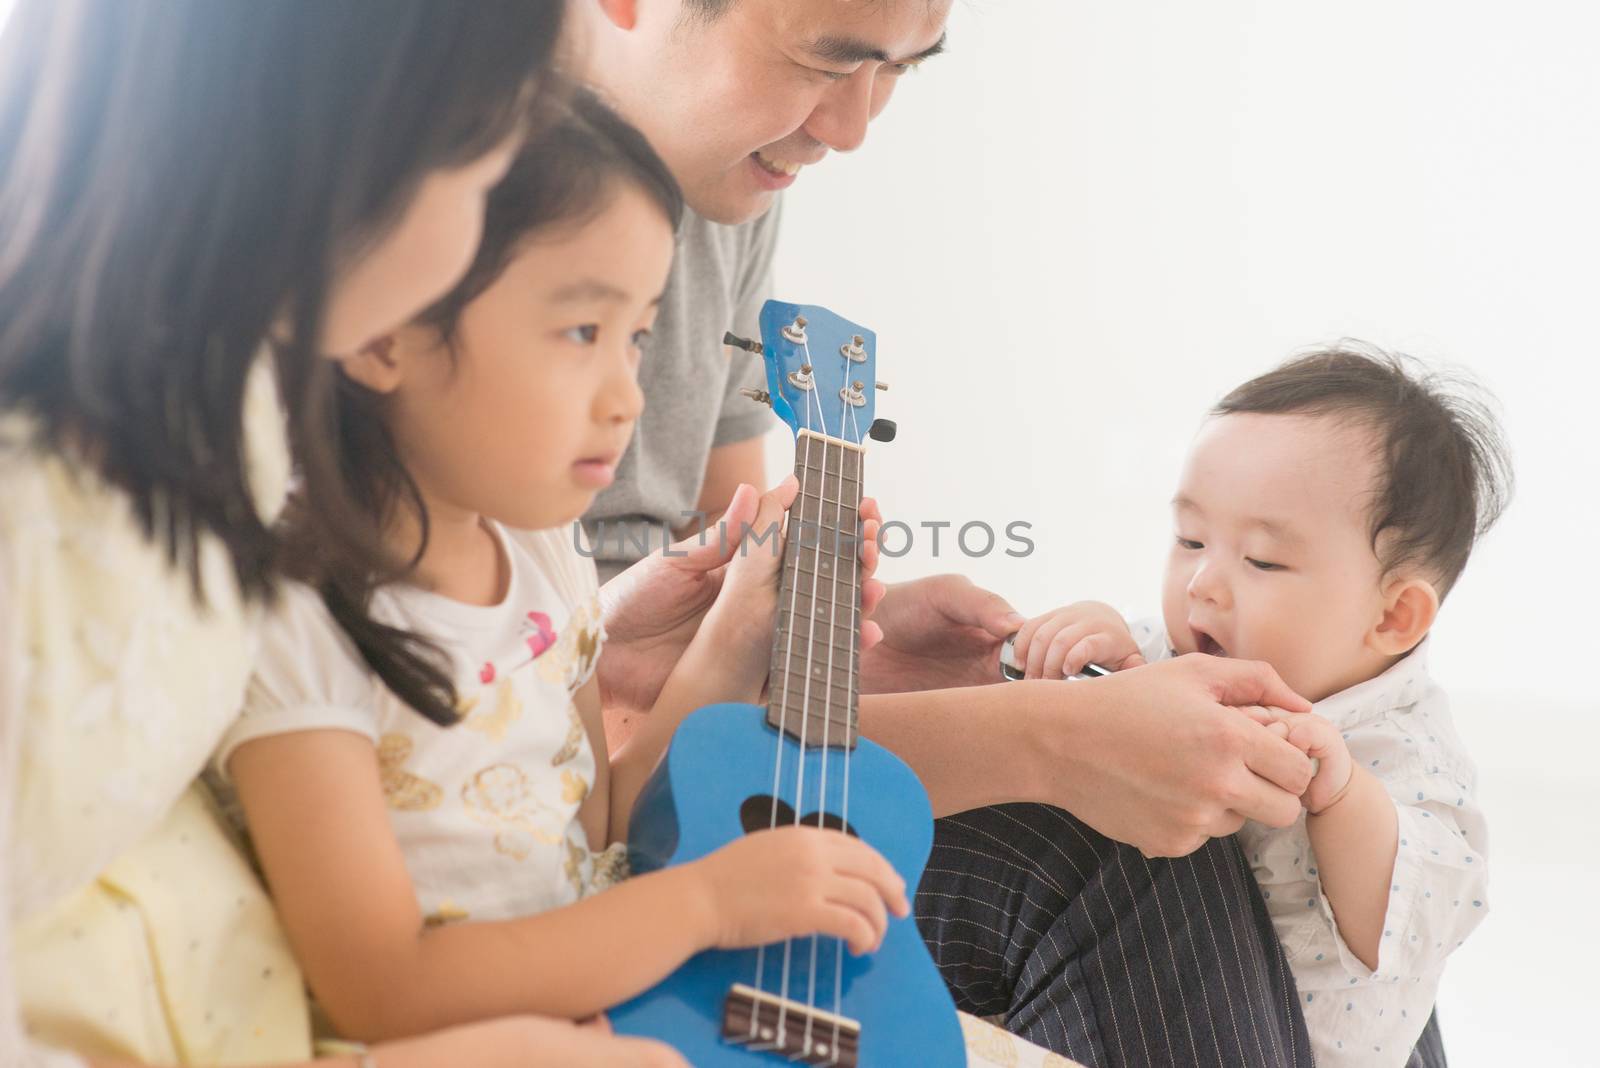 Parents and children playing ukulele together. Asian family spending quality time at home, natural living lifestyle indoors.